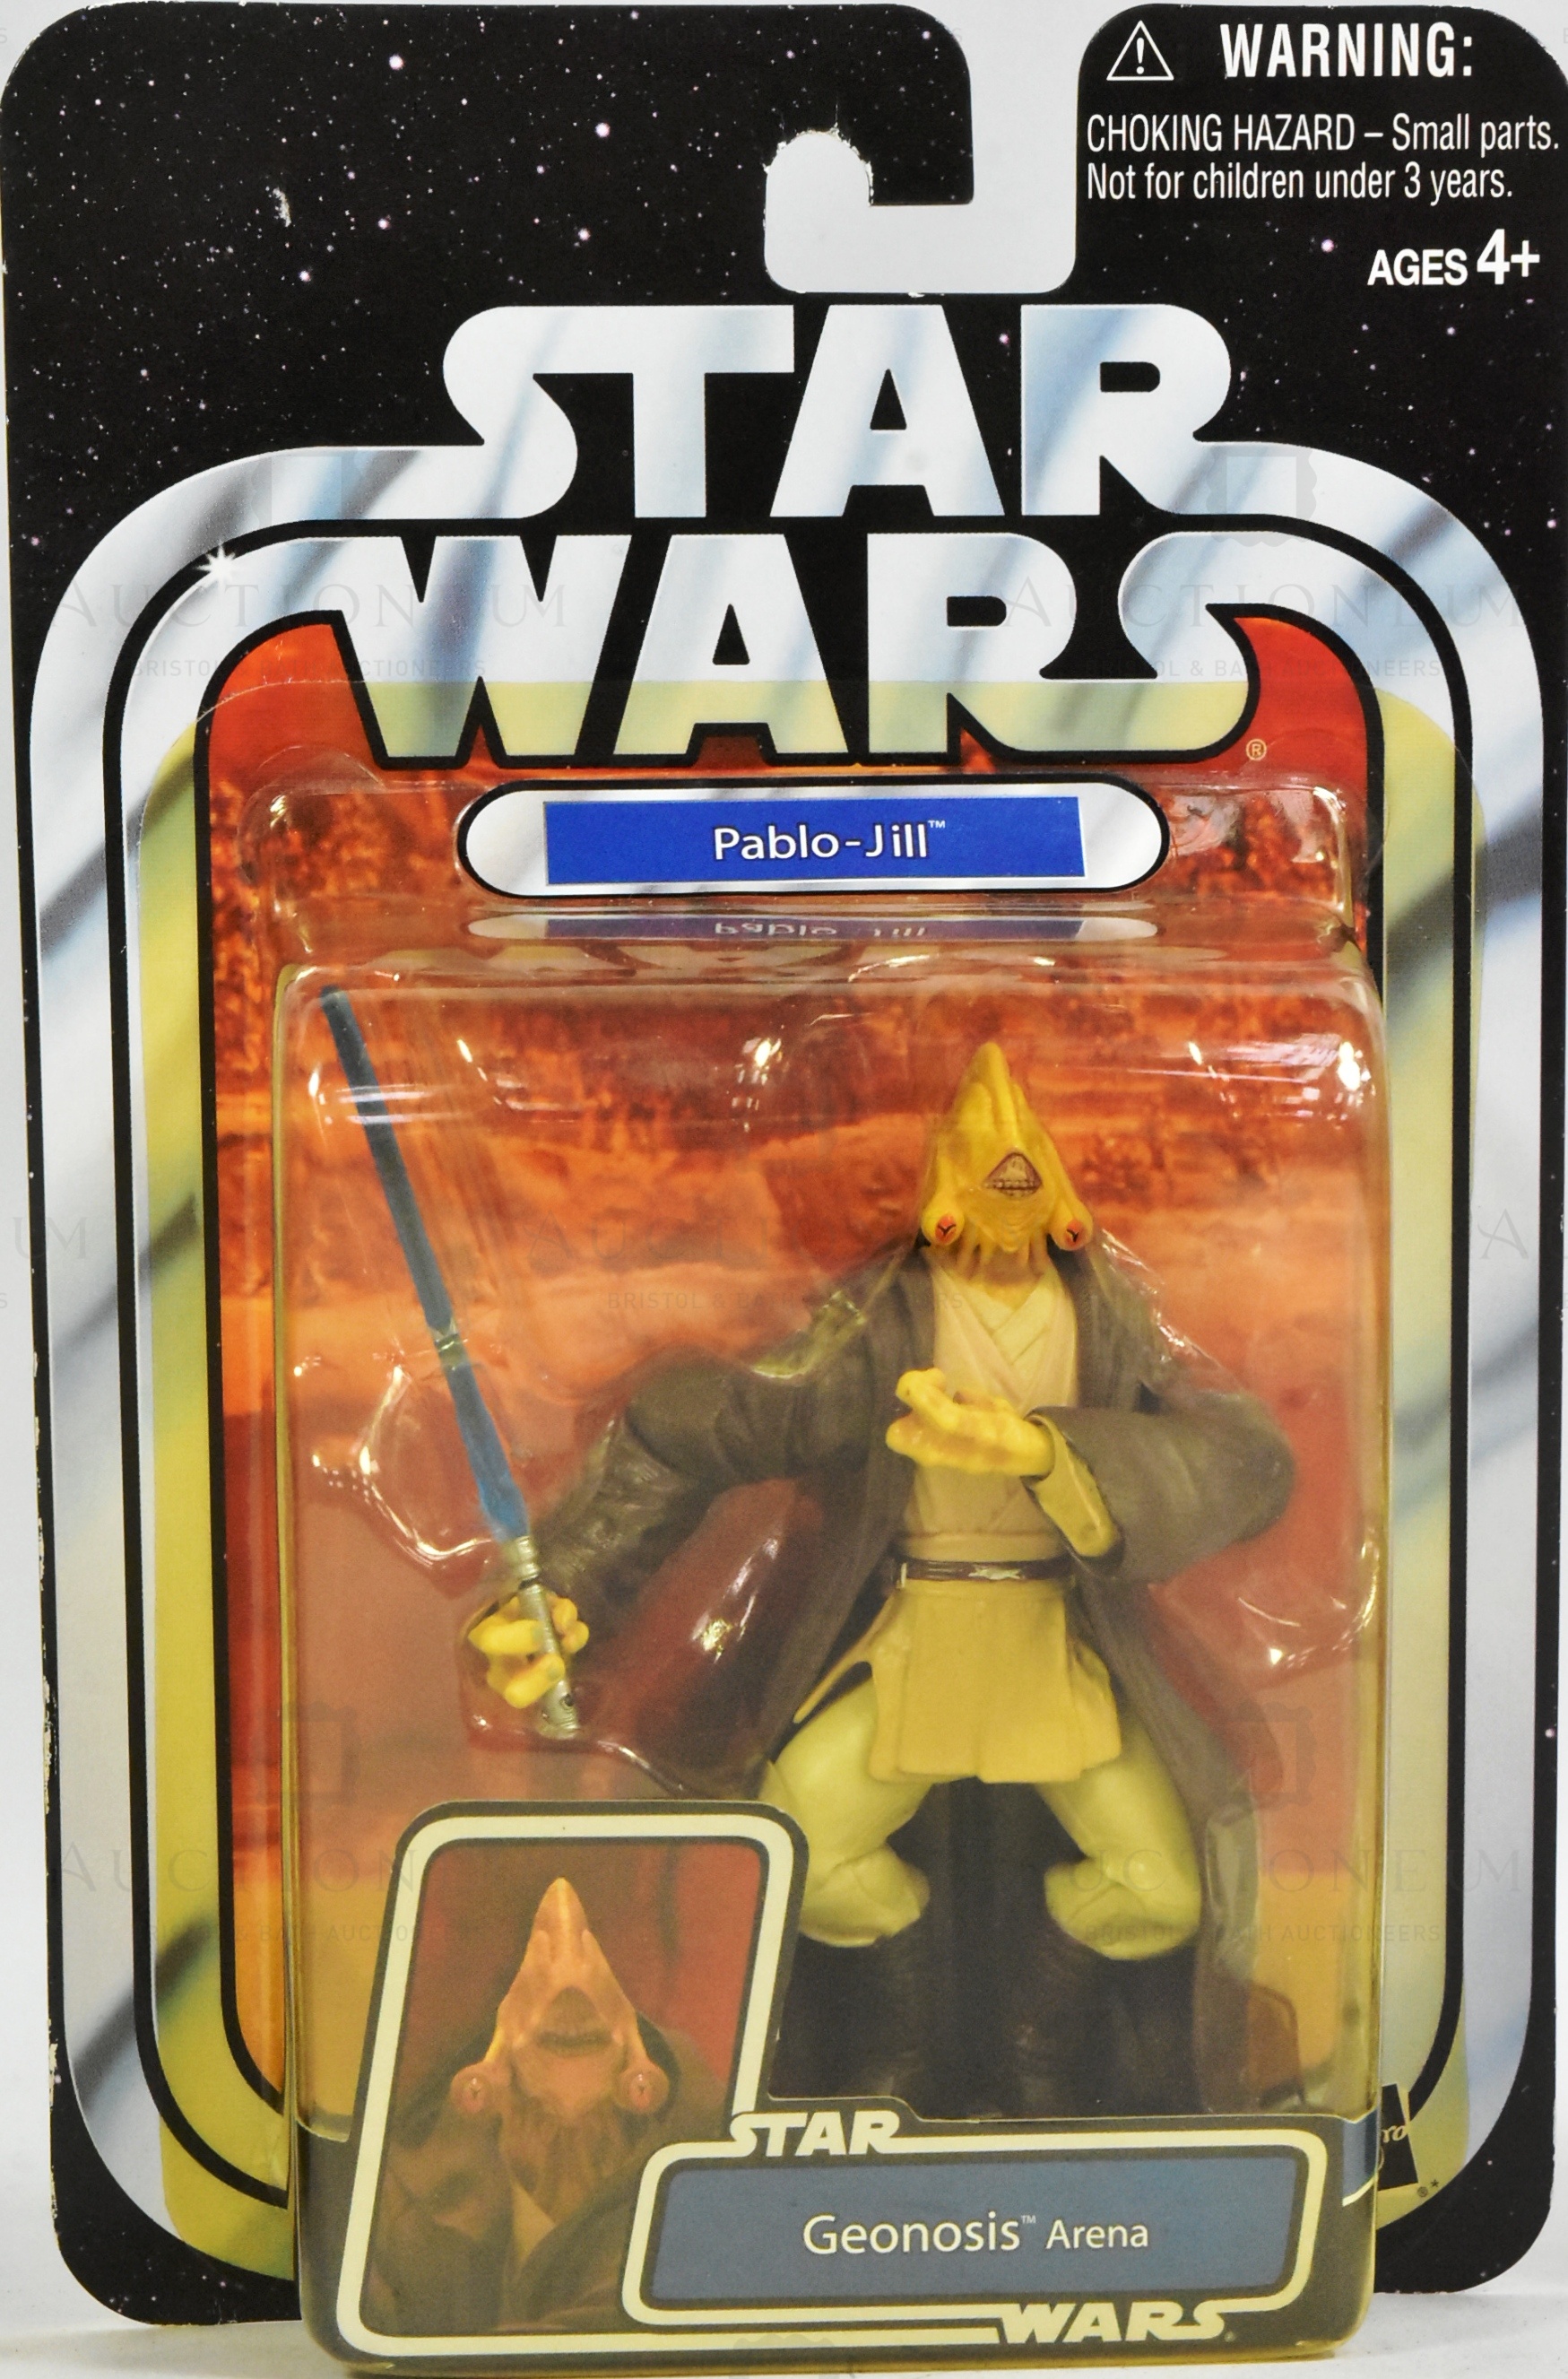 STAR WARS - 2004 COLLECTION OF CARDED ACTION FIGURES - Image 4 of 5